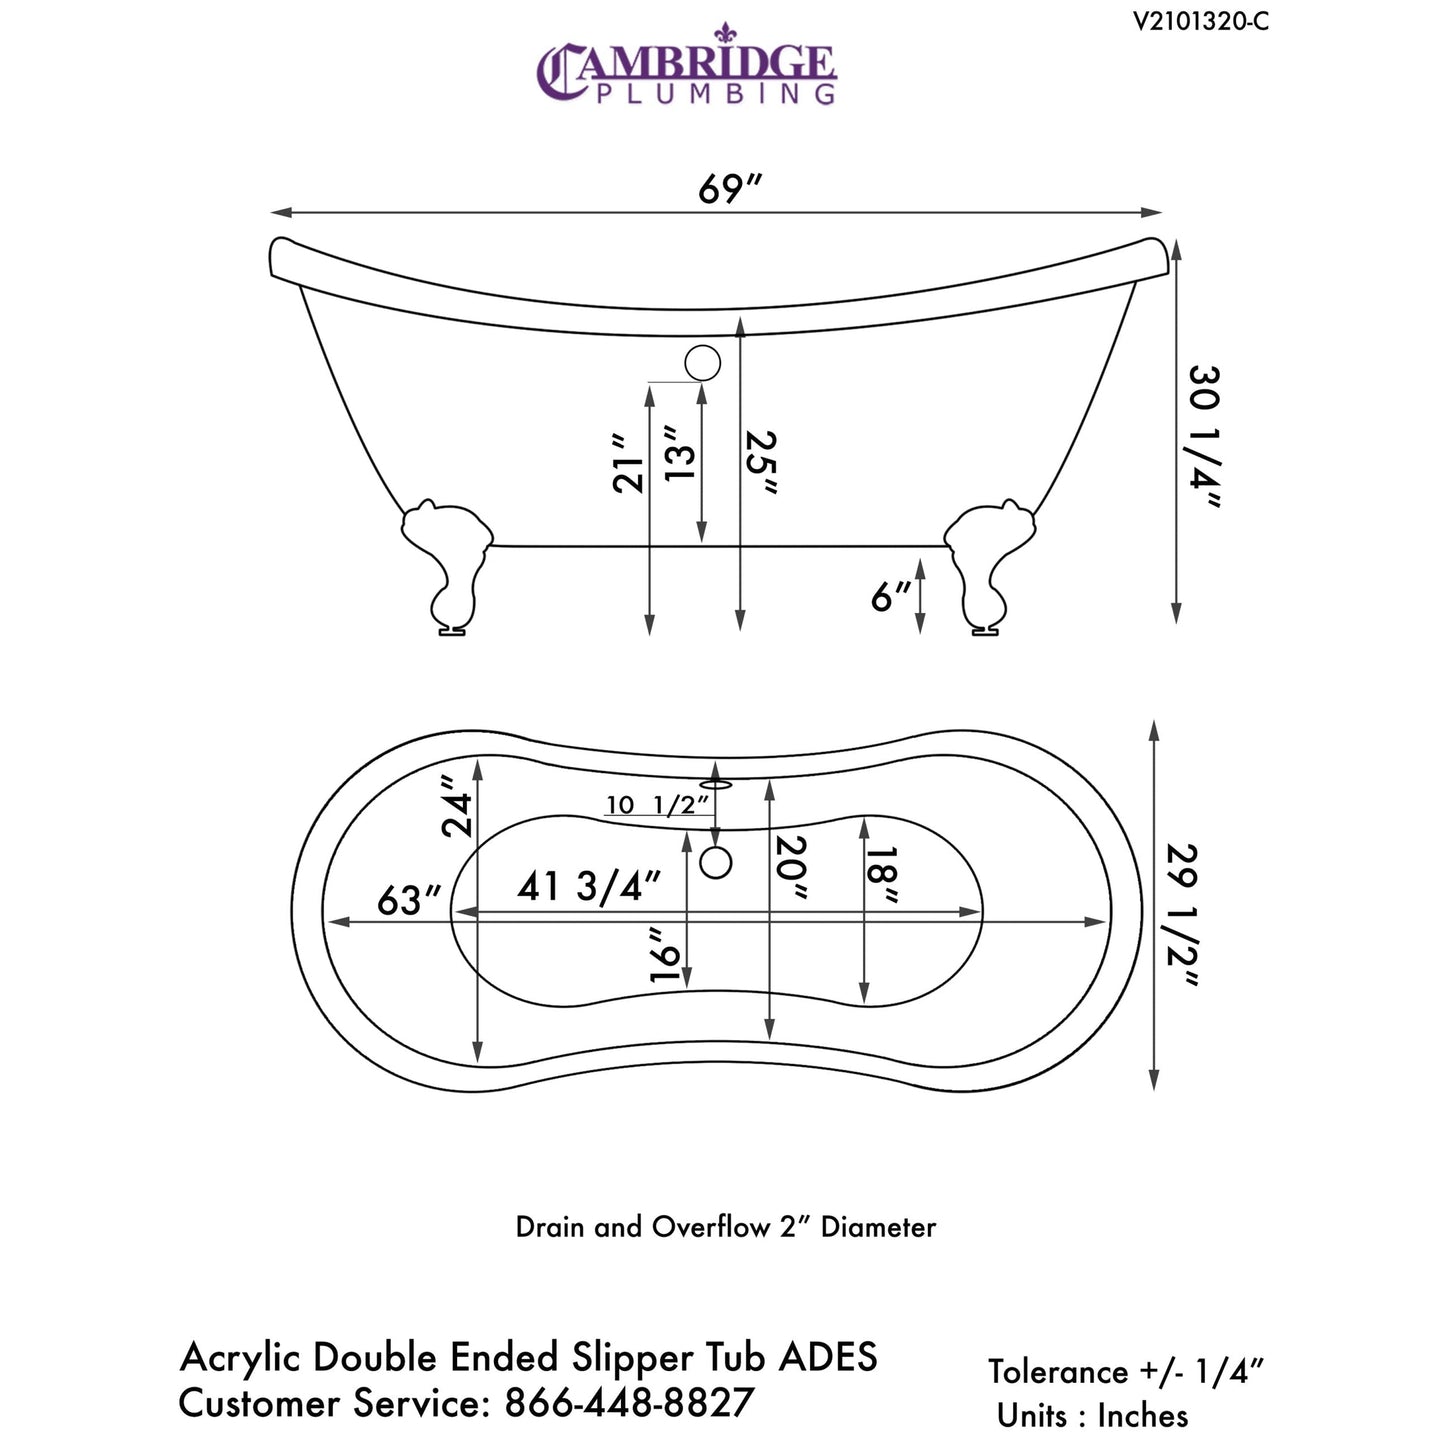 Cambridge Plumbing 69" White Double Slipper Clawfoot Acrylic Bathtub With No Deck Holes With Polished Chrome Feet